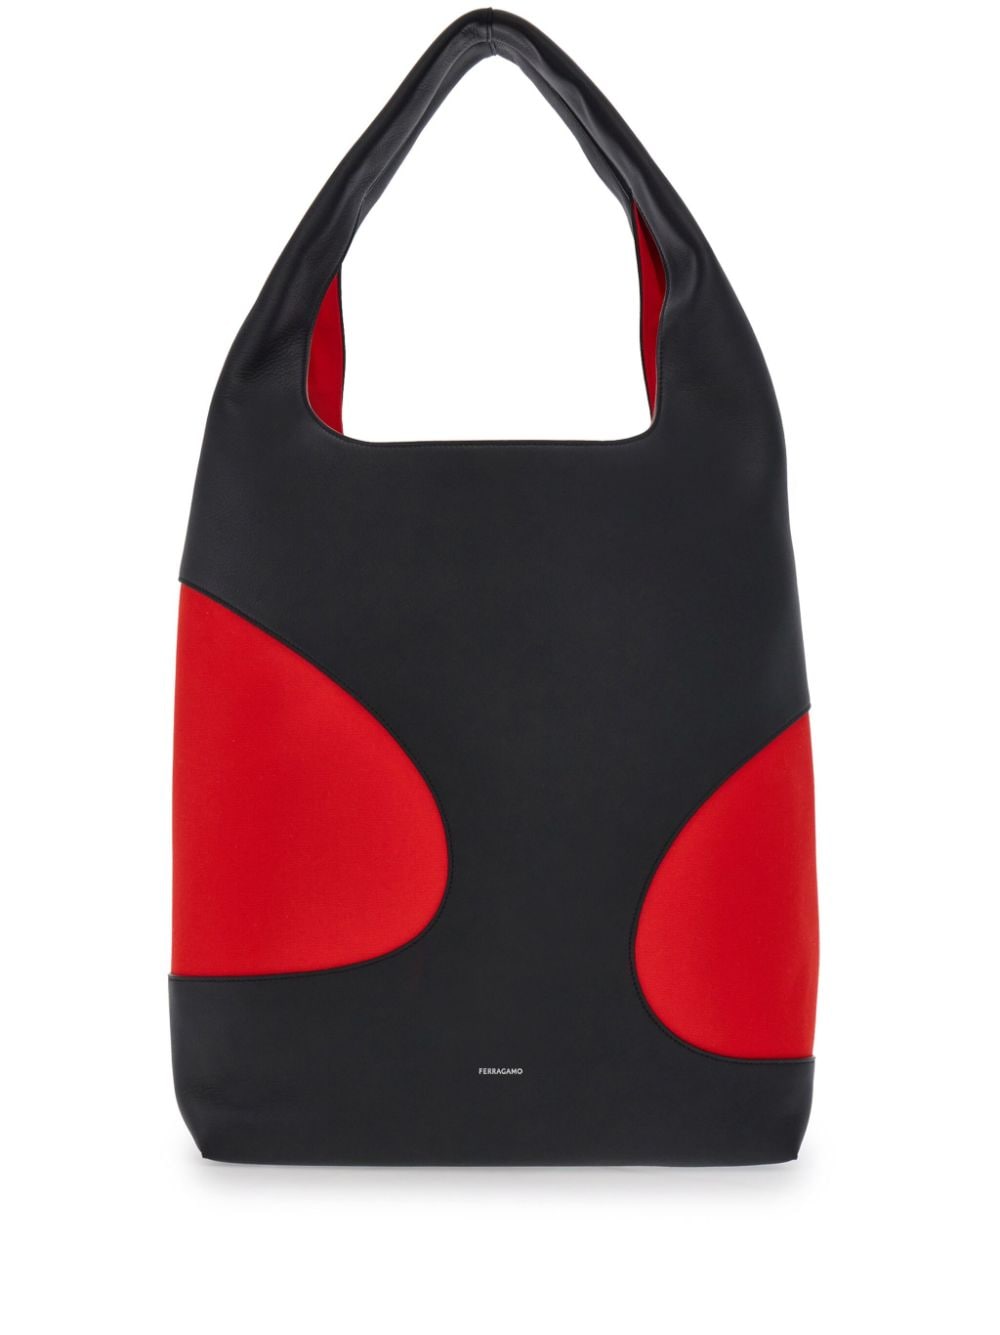 Ferragamo Man Tote Bag With Cut-out In Black